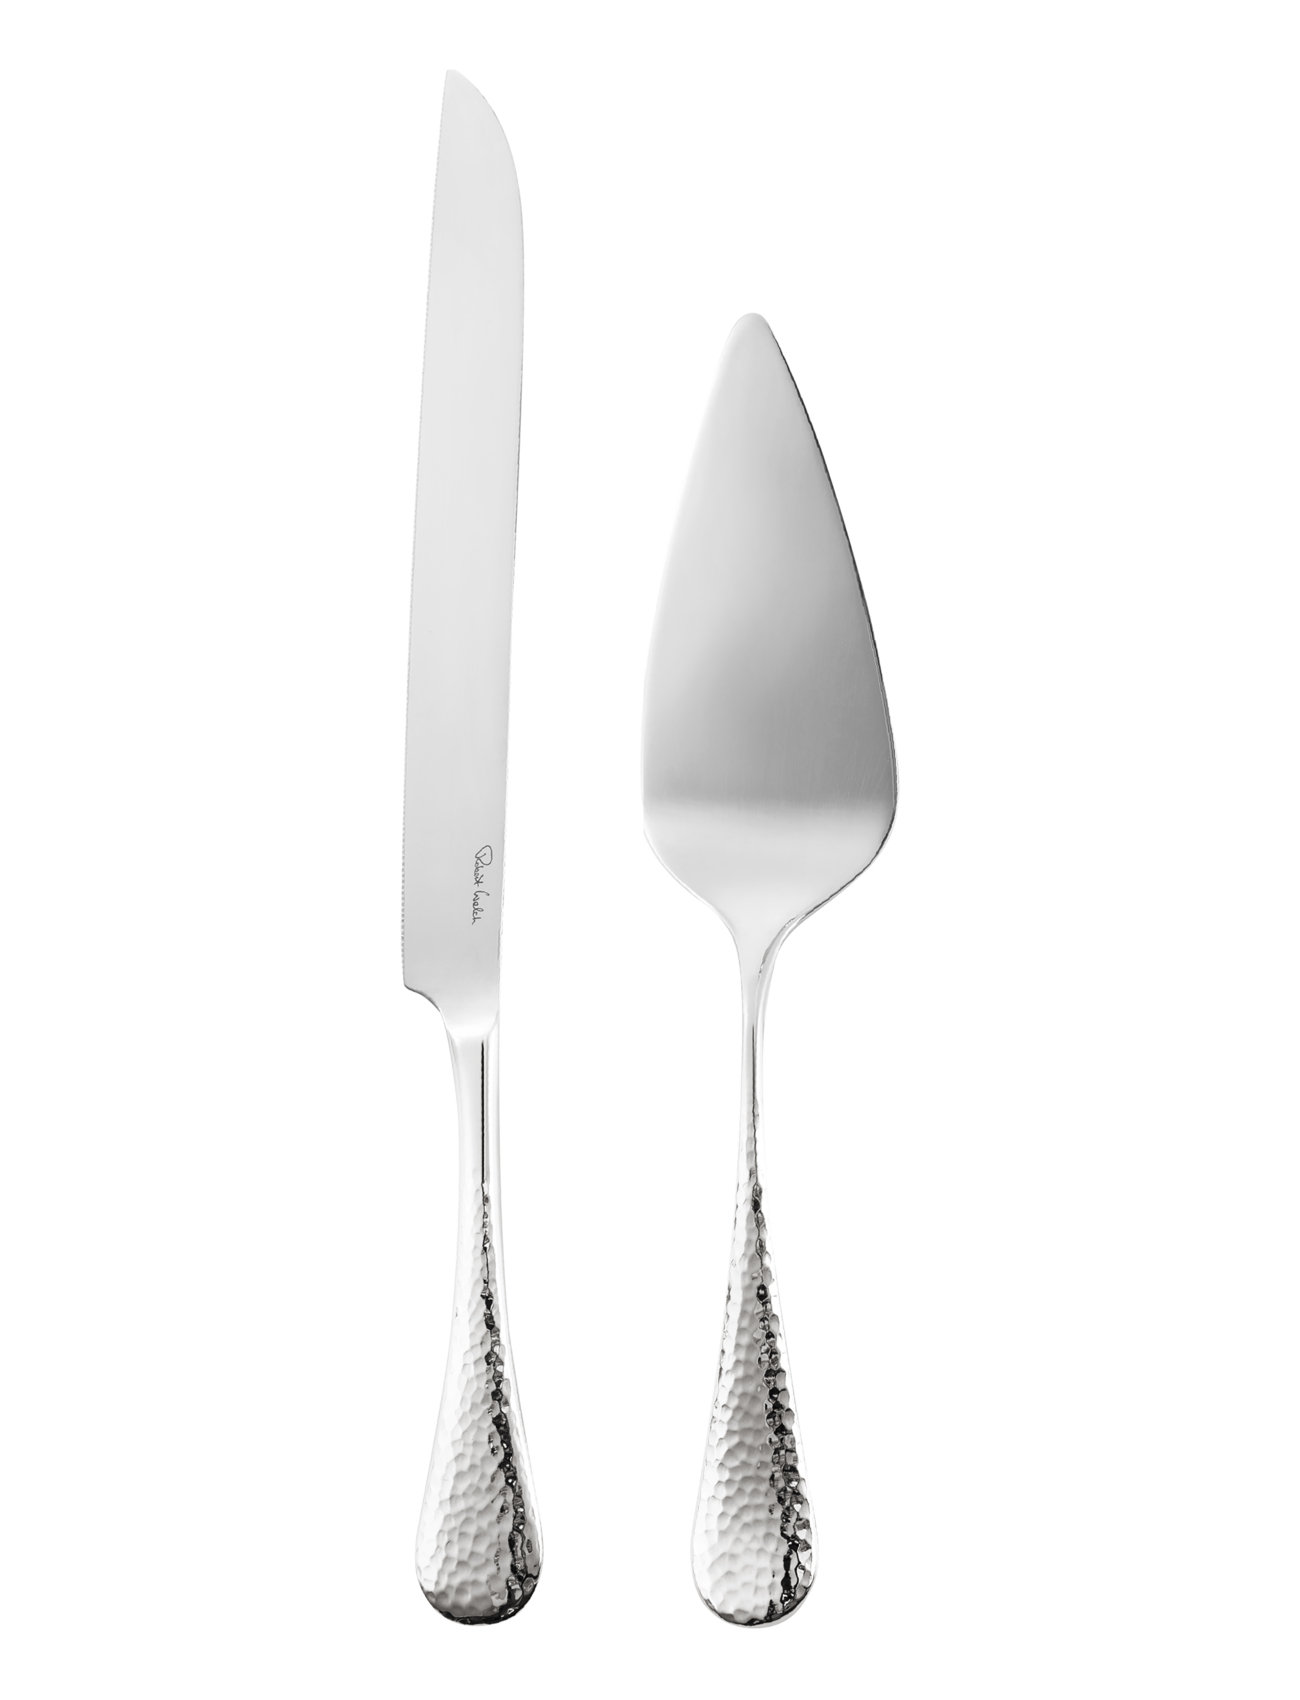 H Ybourne Bright Cake Serving Set, 2 Pieces Home Tableware Cutlery Cake Knifes Silver Robert Welch